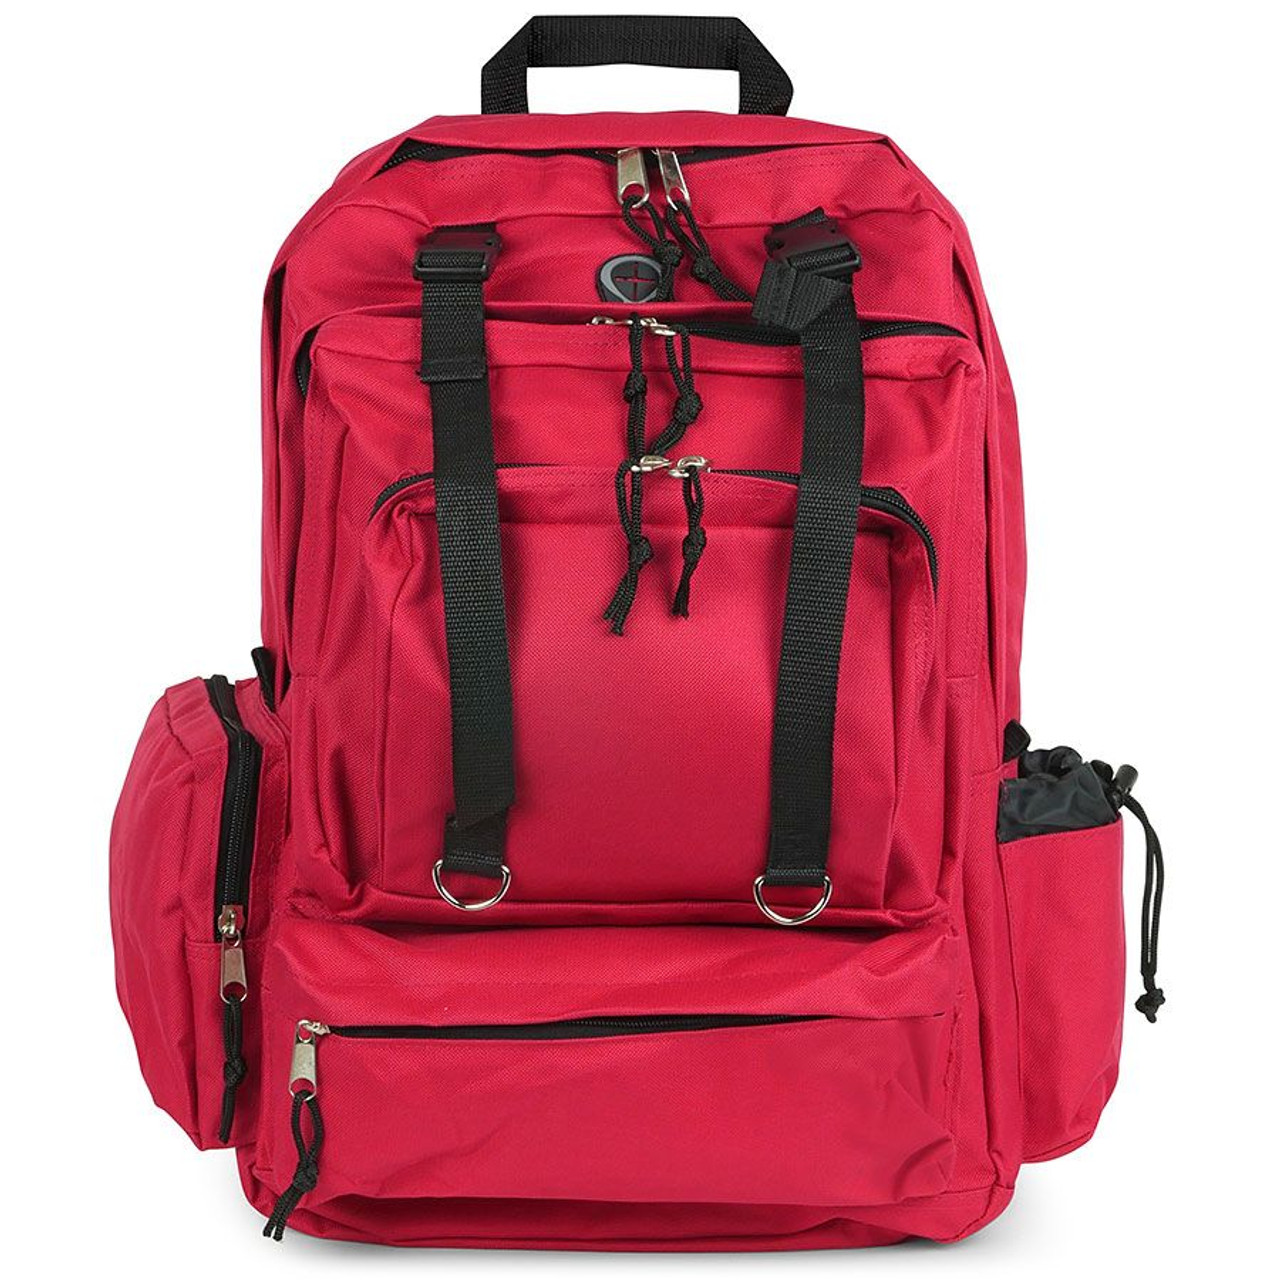 https://cdn11.bigcommerce.com/s-tumf4kk1l4/images/stencil/1280x1280/products/3911/7203/deluxe-red-emergency-backpack-gear-bag-nylon-29__24431.1700262148.jpg?c=1?imbypass=on